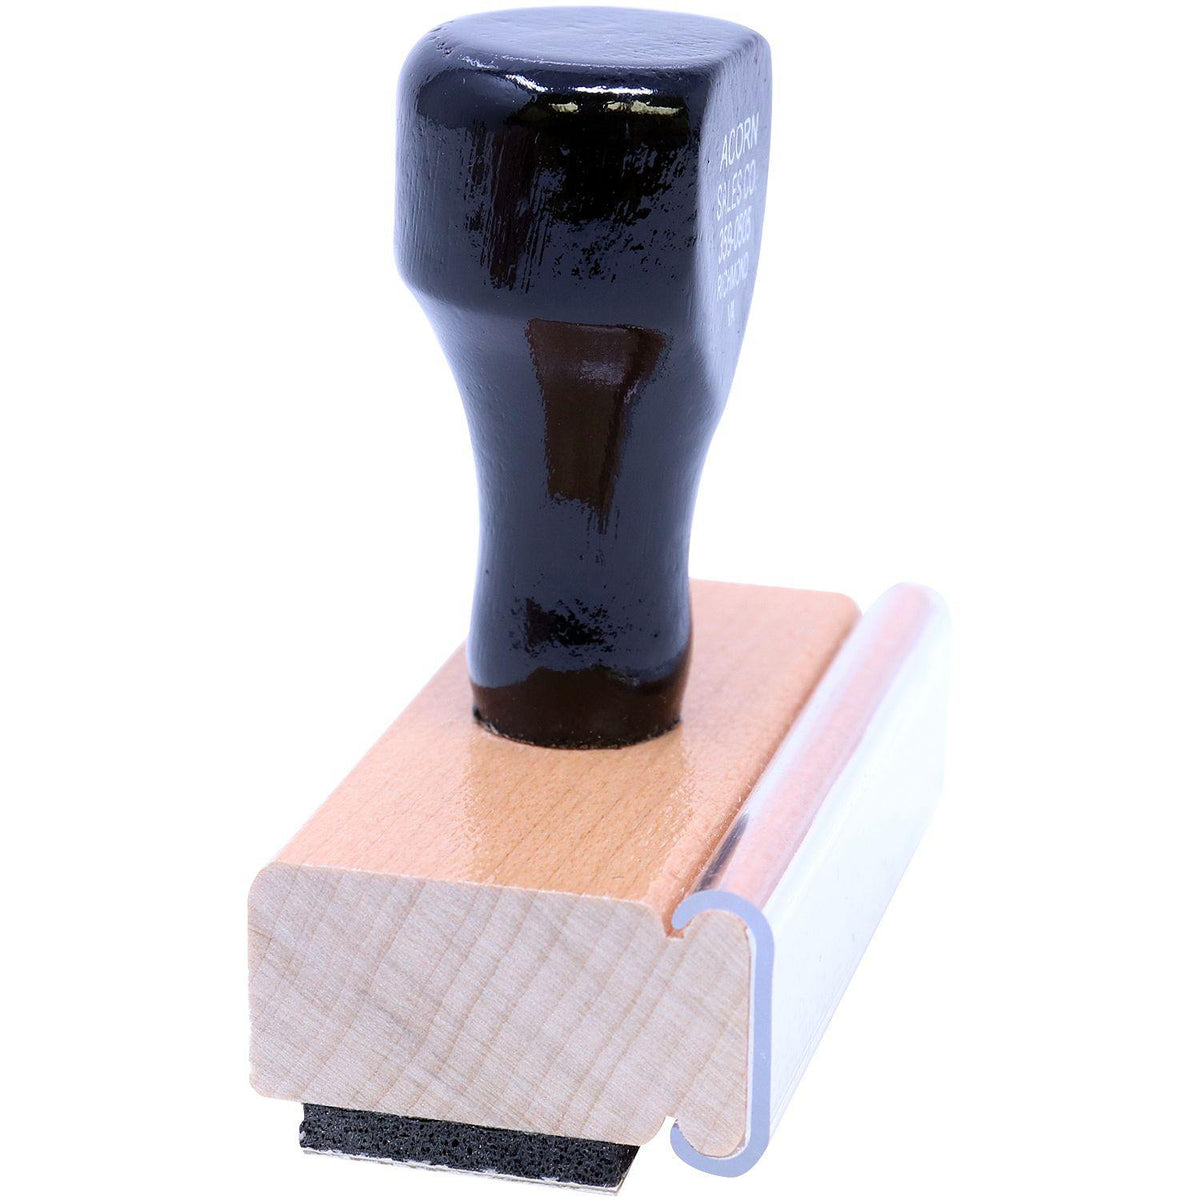 Side View of Void with X Rubber Stamp at an Angle